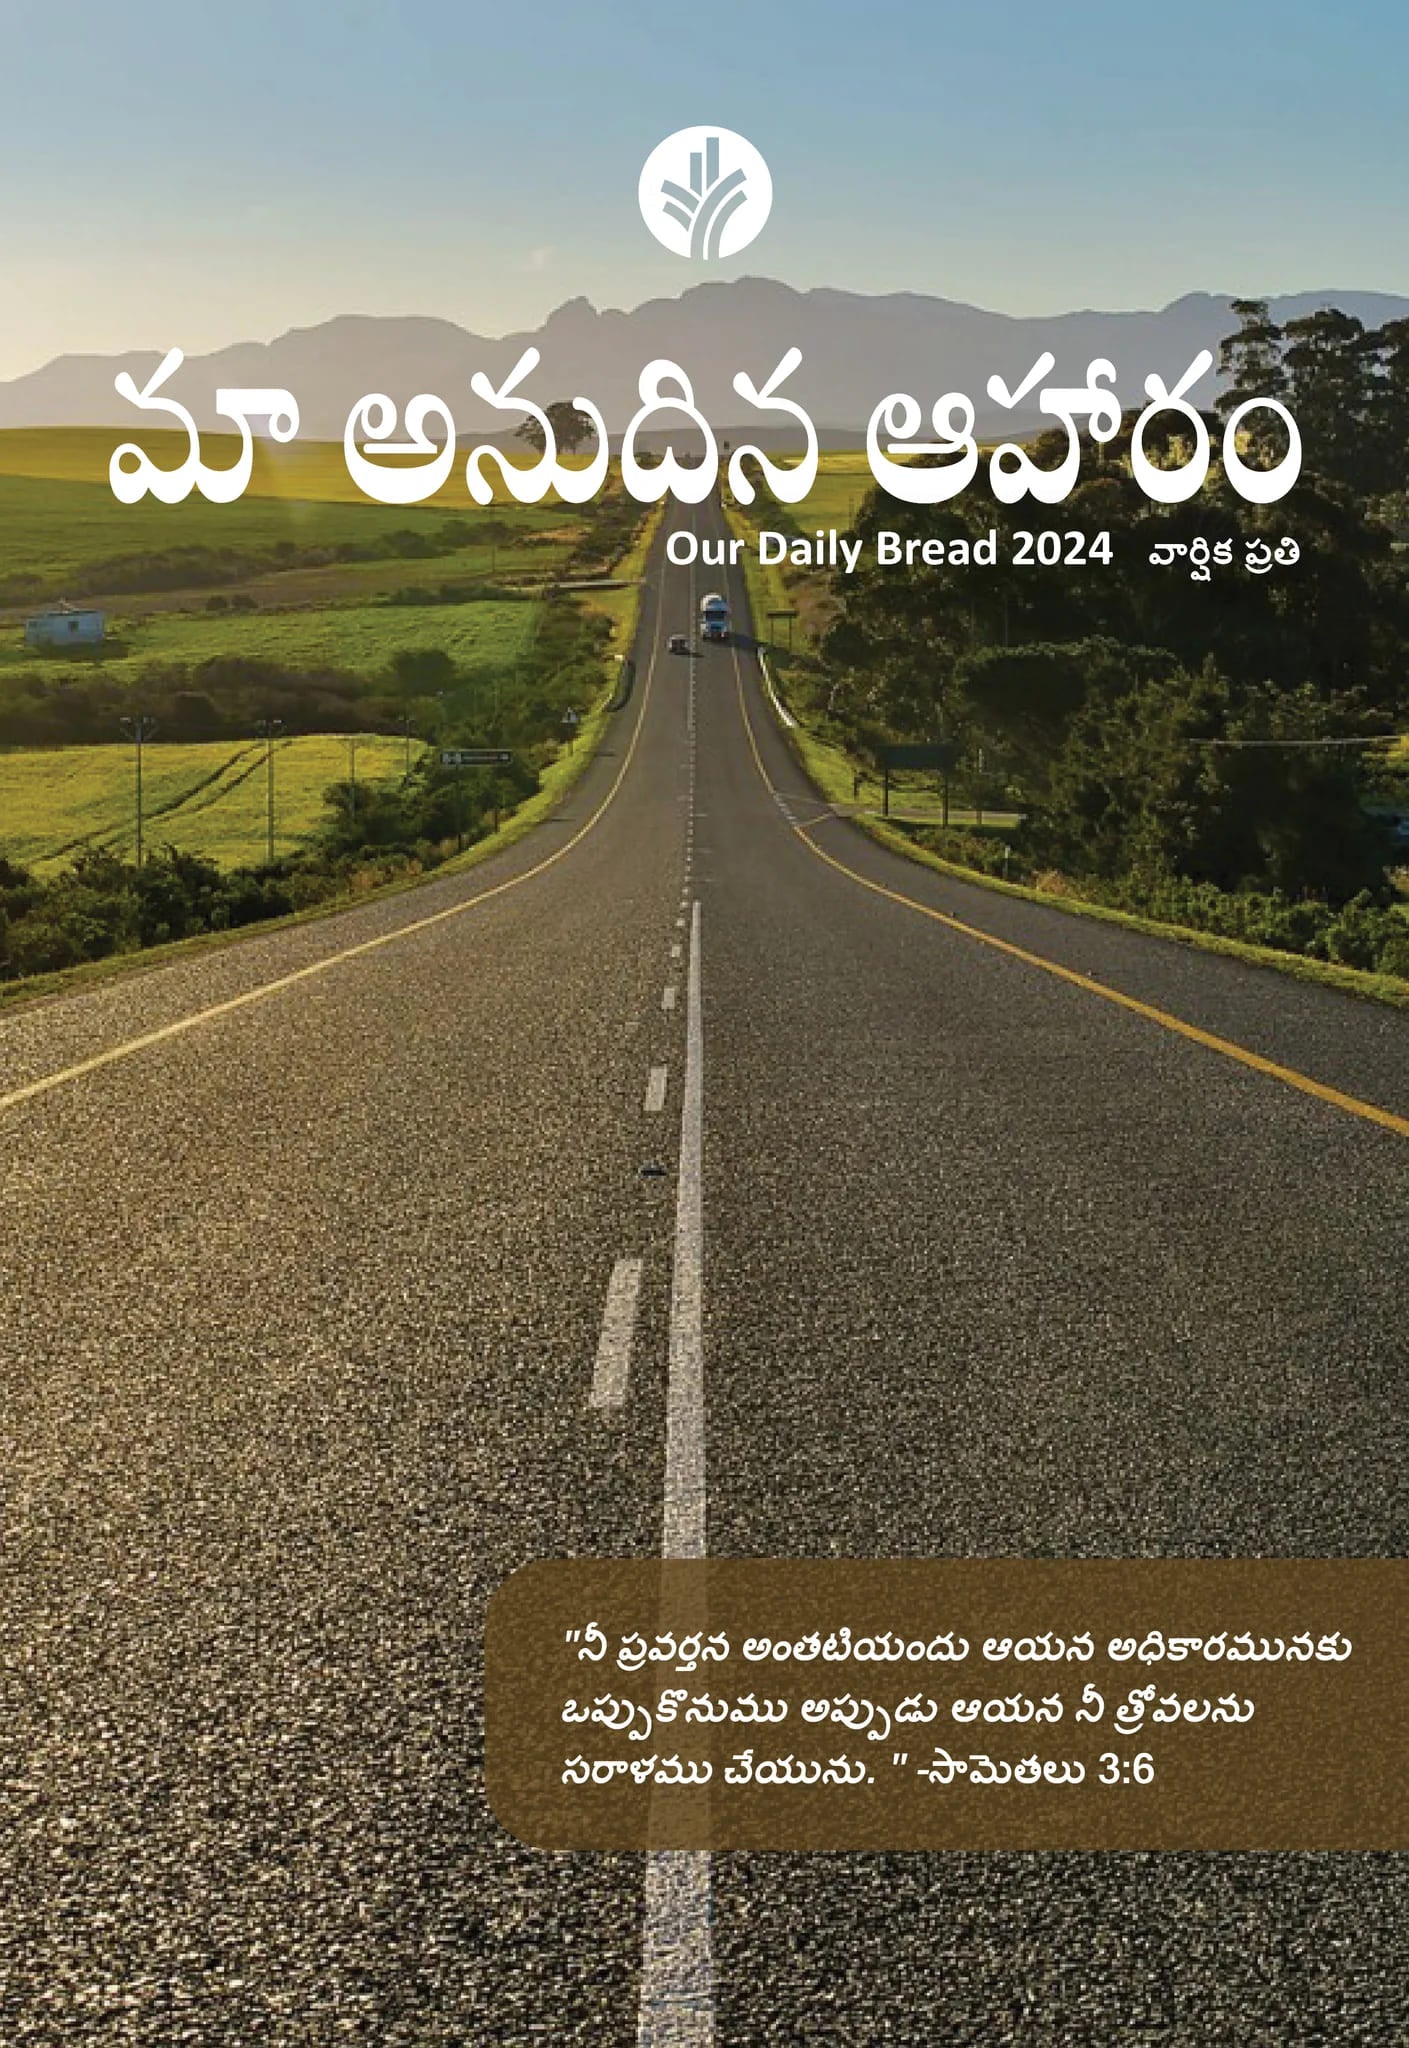 Our Daily Bread Annual Edition 2024 - Inspirational Meditations for Spiritual Growth | Available in all language